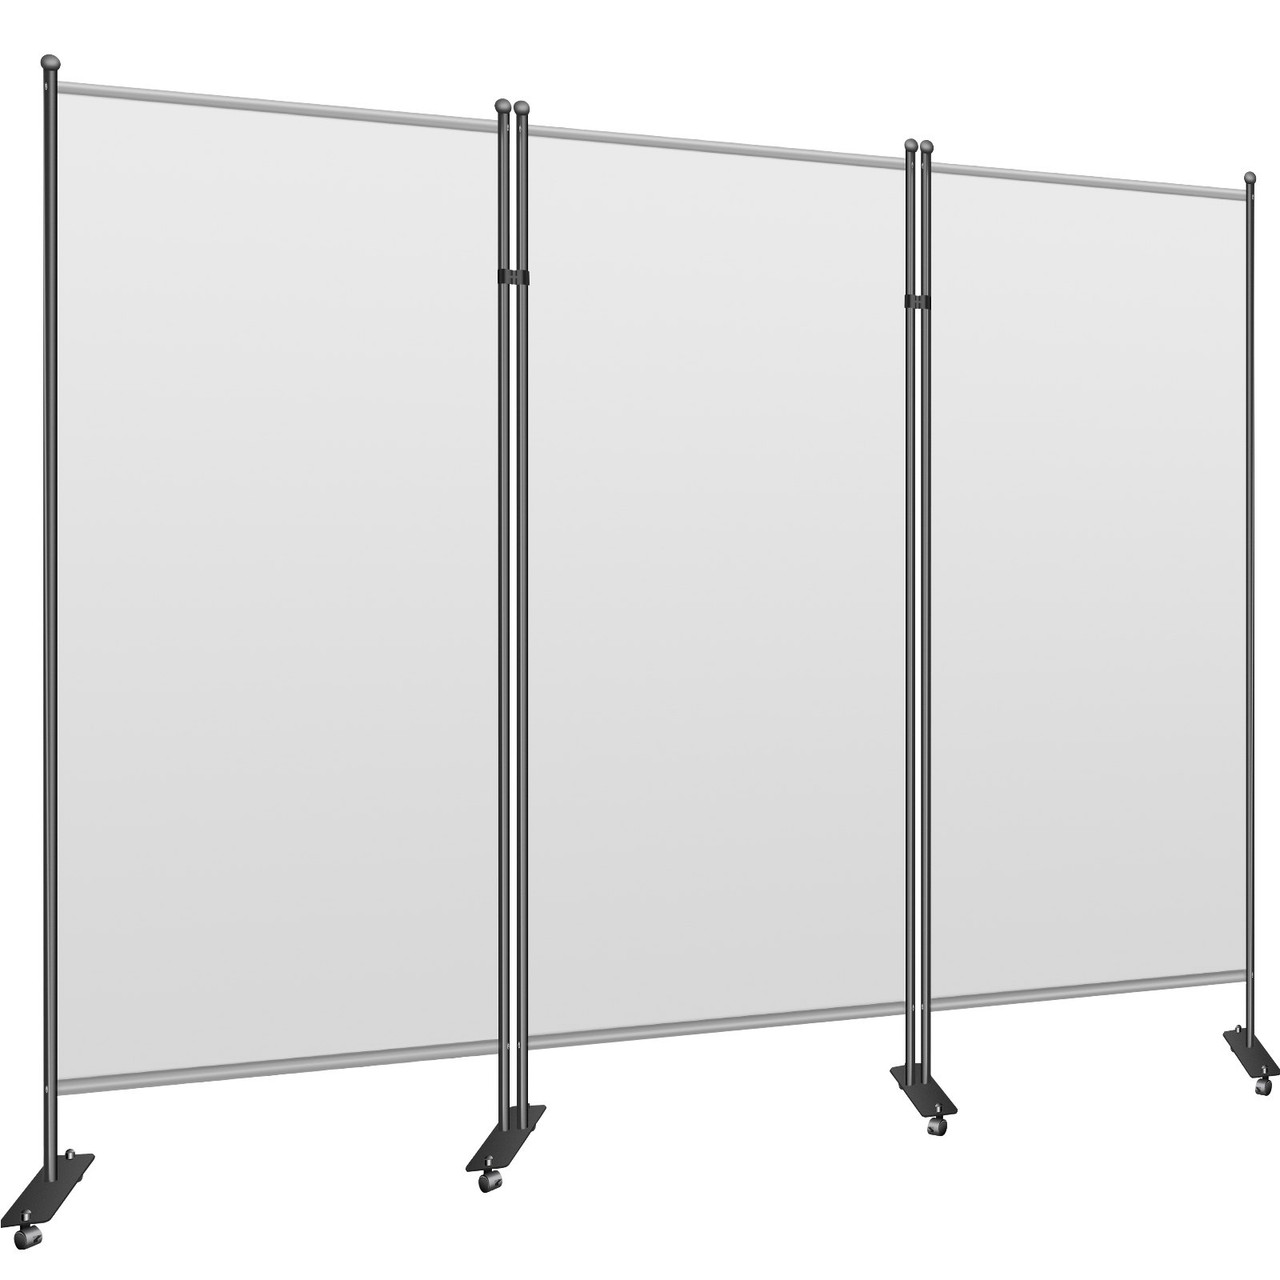 Office Partition 89" W x 14" D x 72.8" H Room Divider 3-Panel Office Divider Folding Portable Office Walls with Non-See-Through Fabric Room Partition Light Gray for Room Office Restaurant